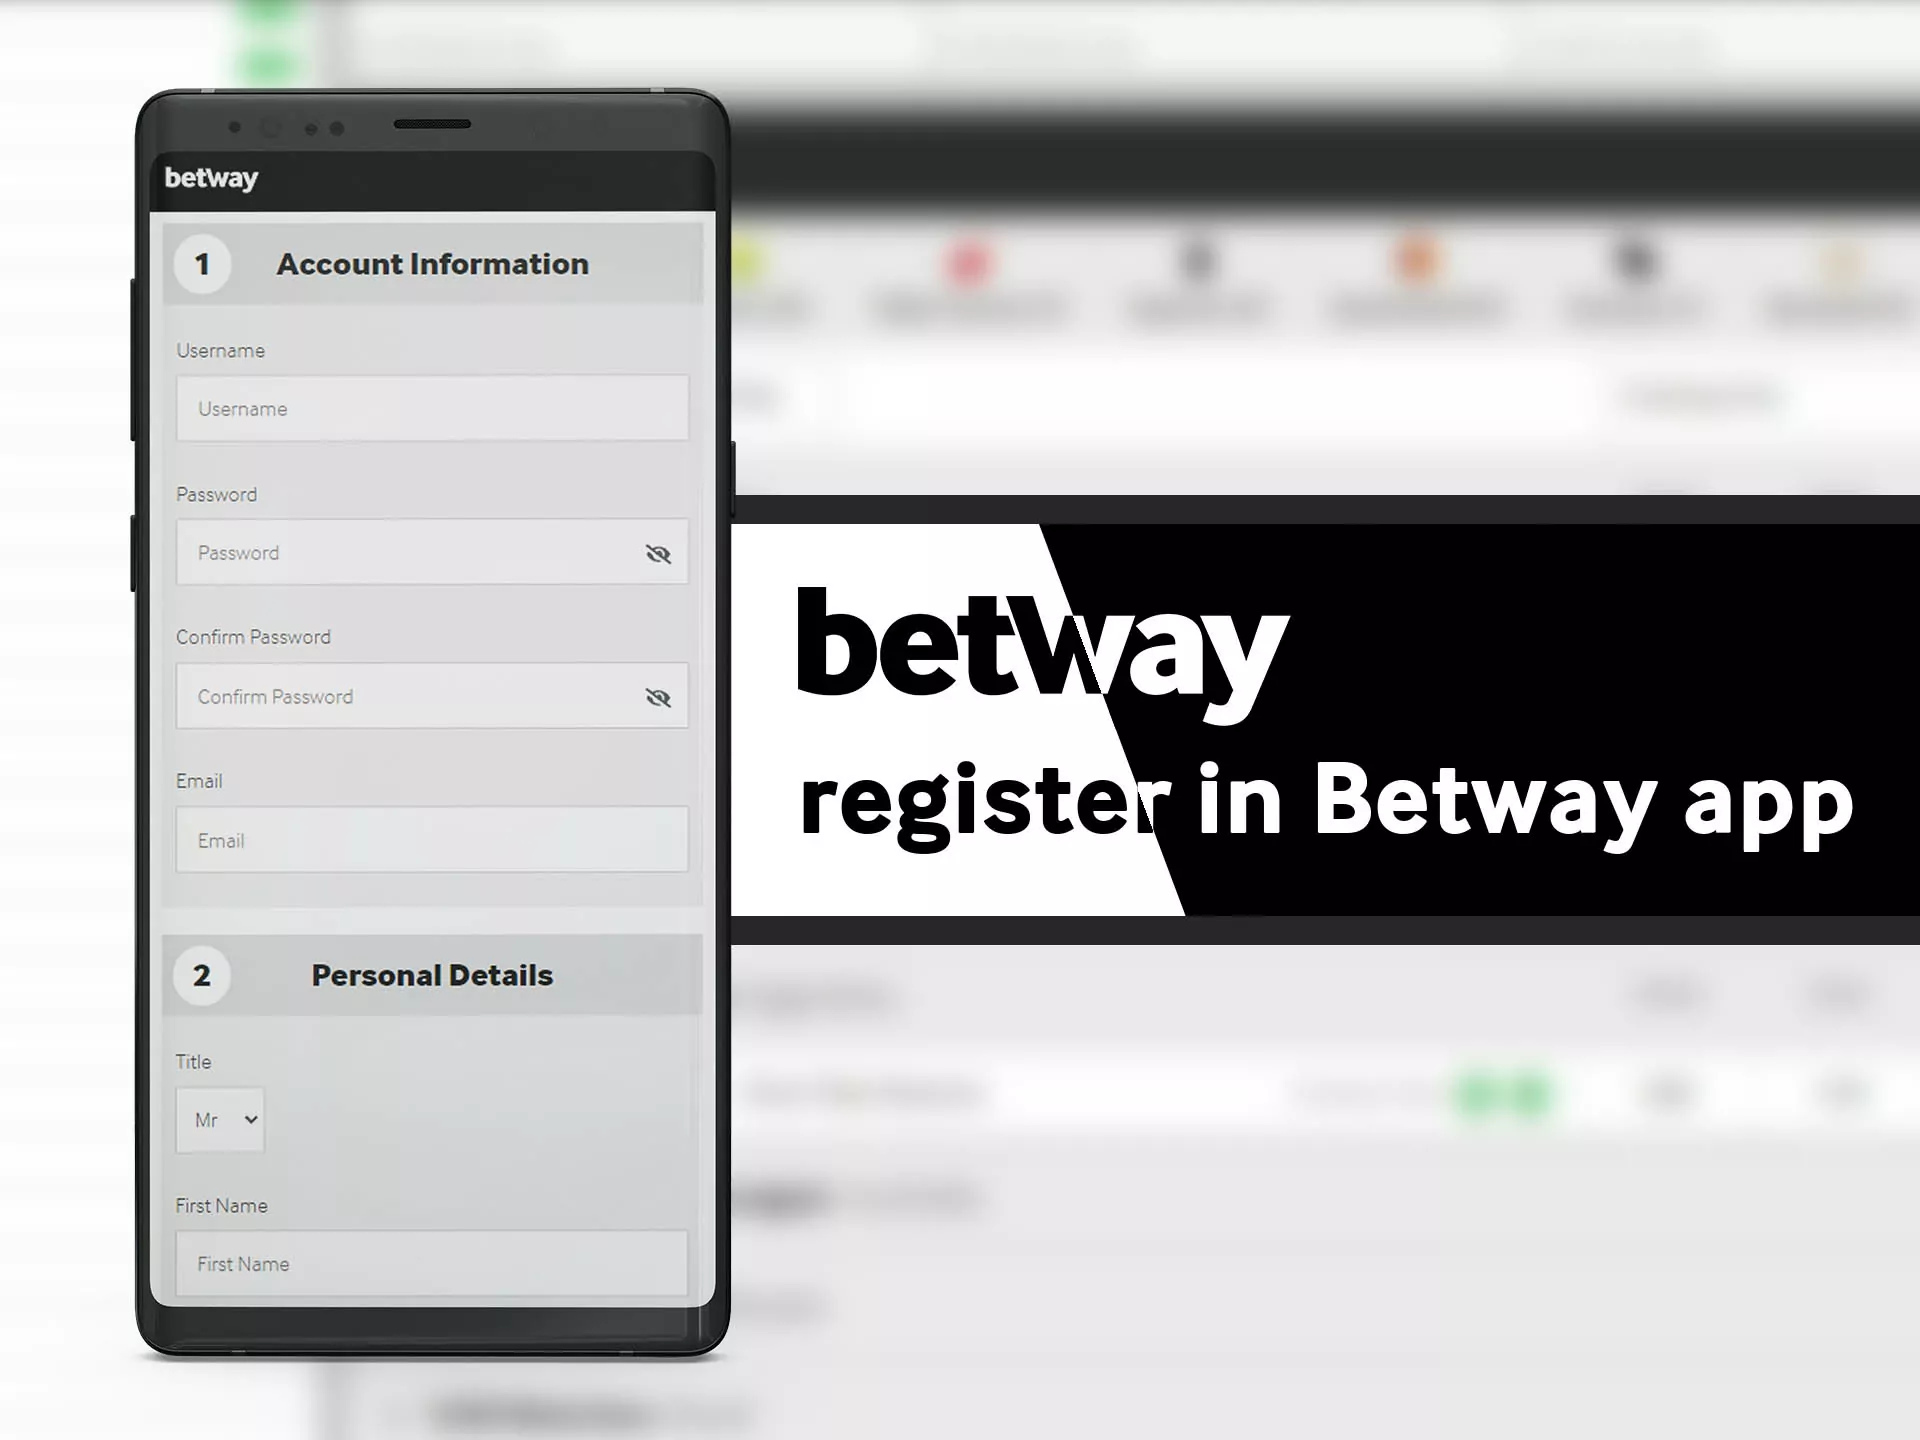 You can registrate in Betway with Betway app.